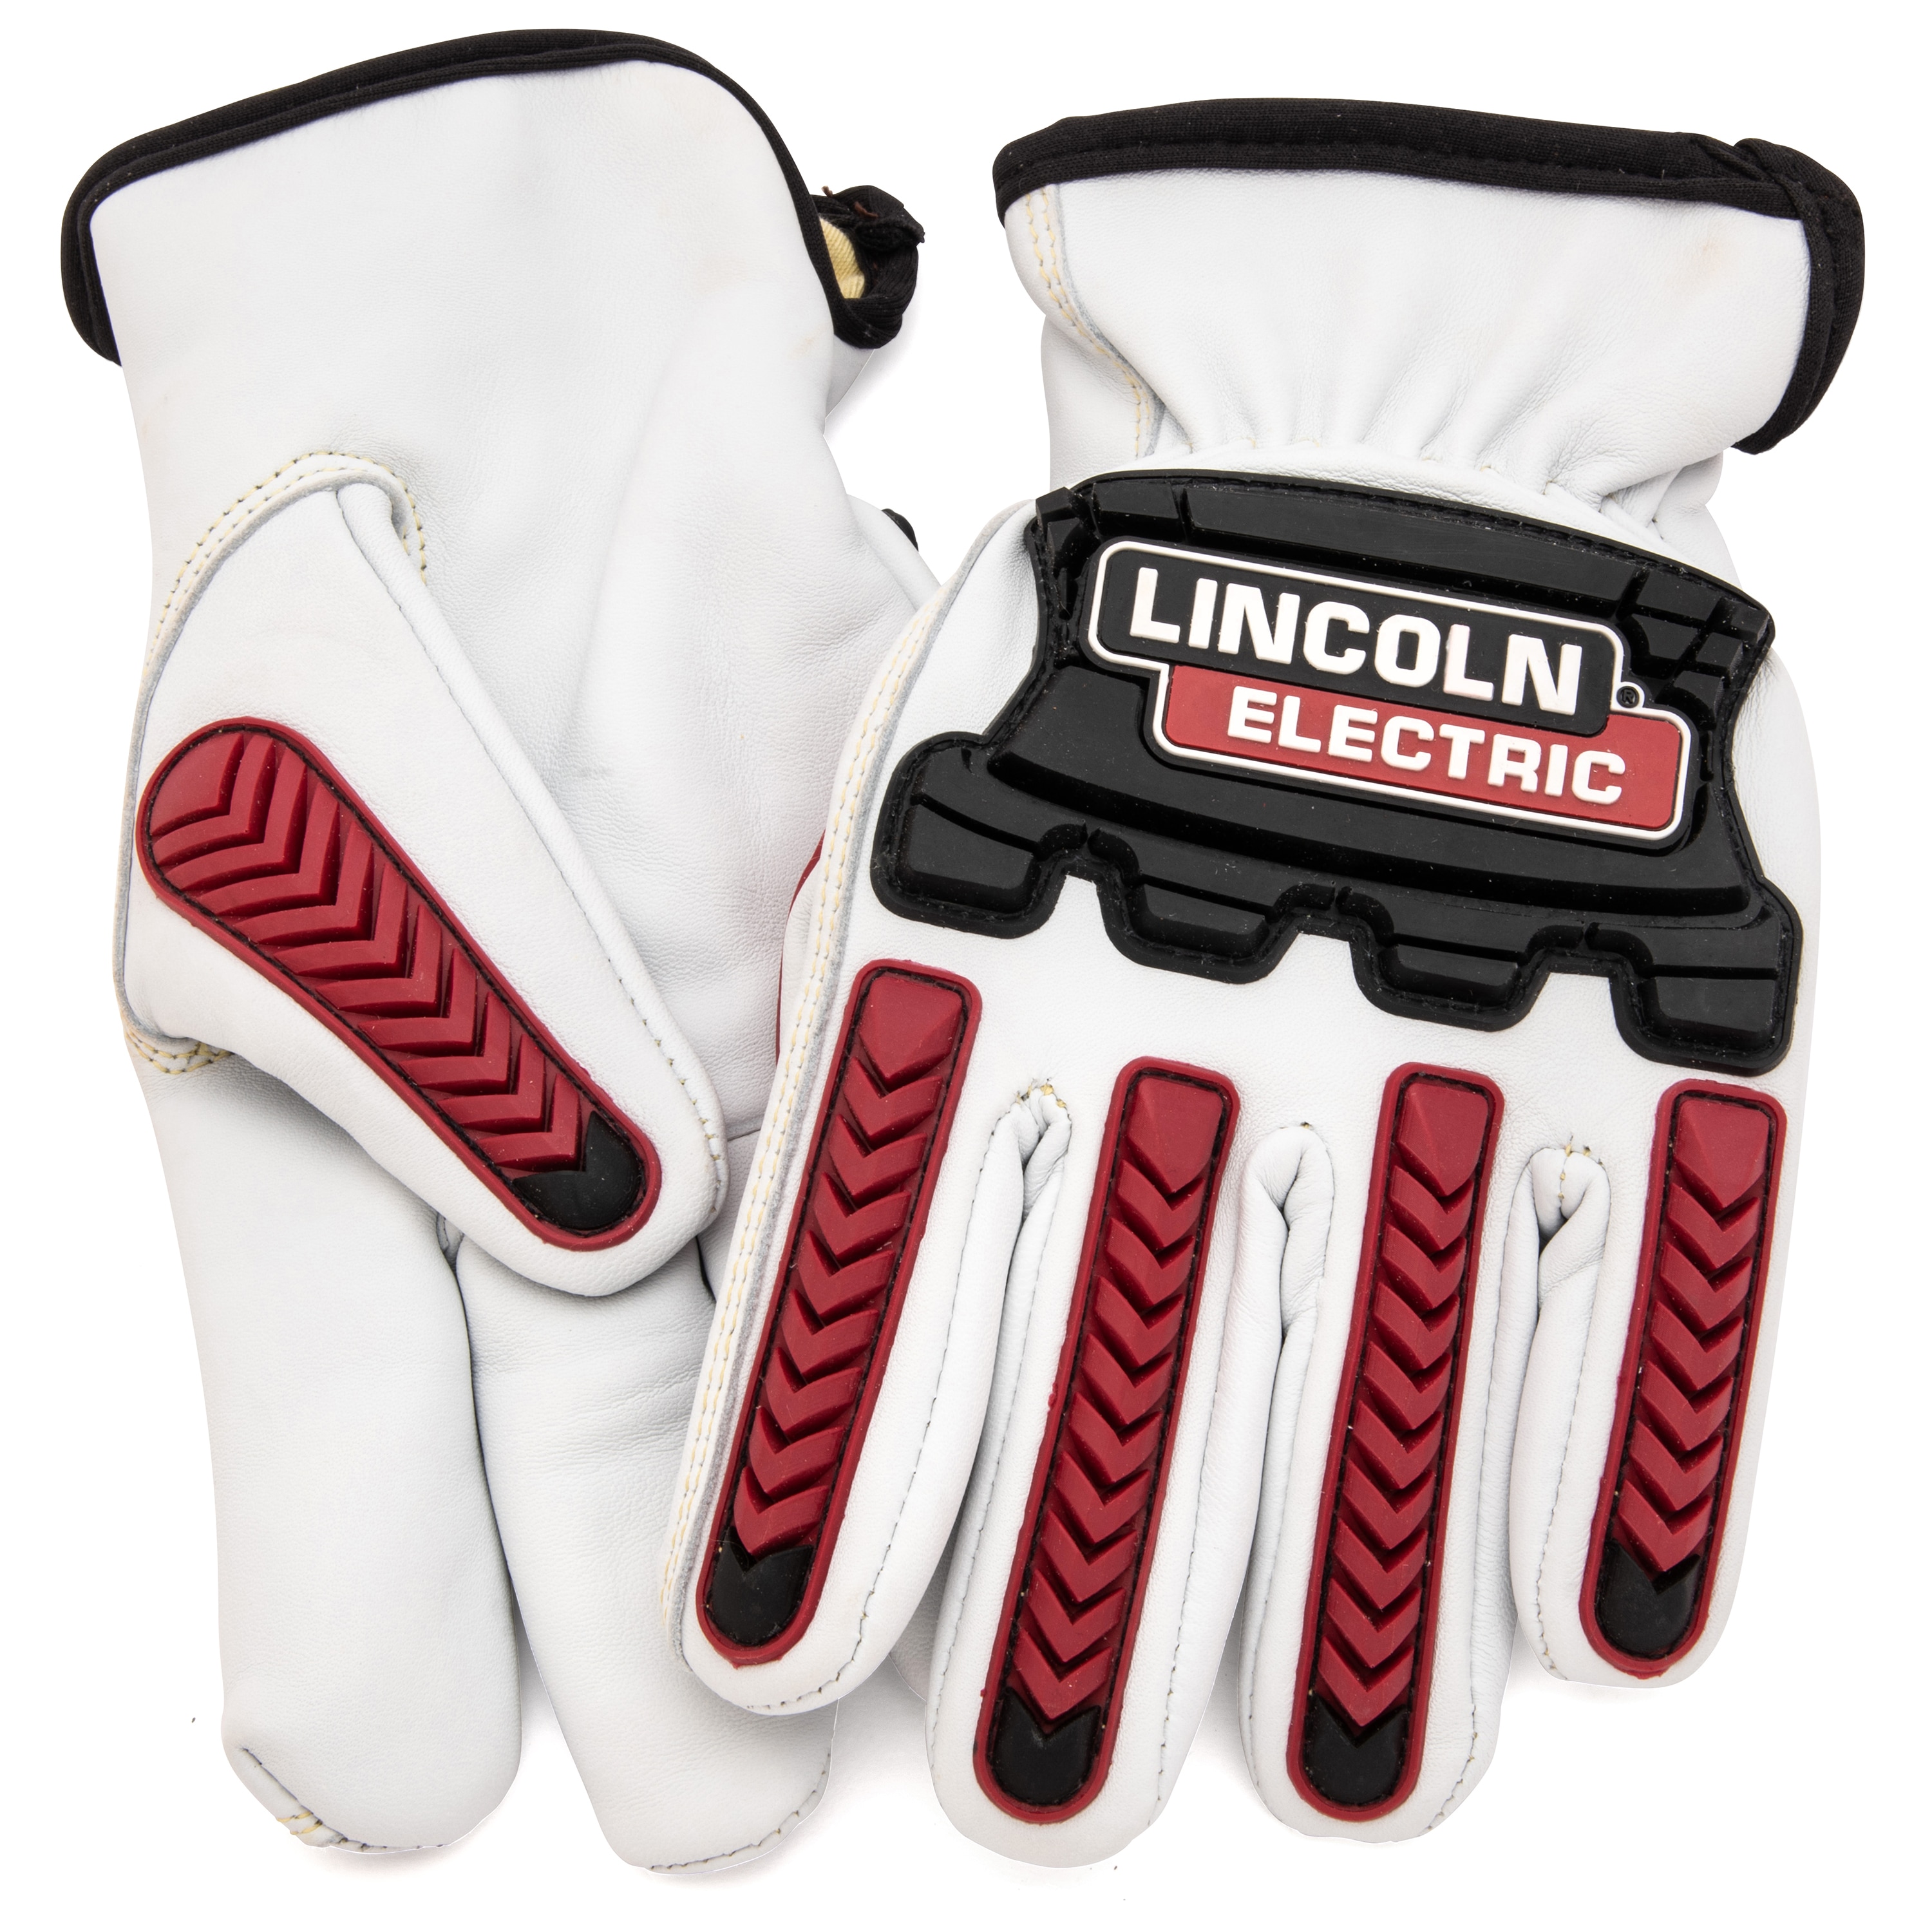 Lincoln Electric X-large Sheep Skin Welding Gloves, (1-Pair) in